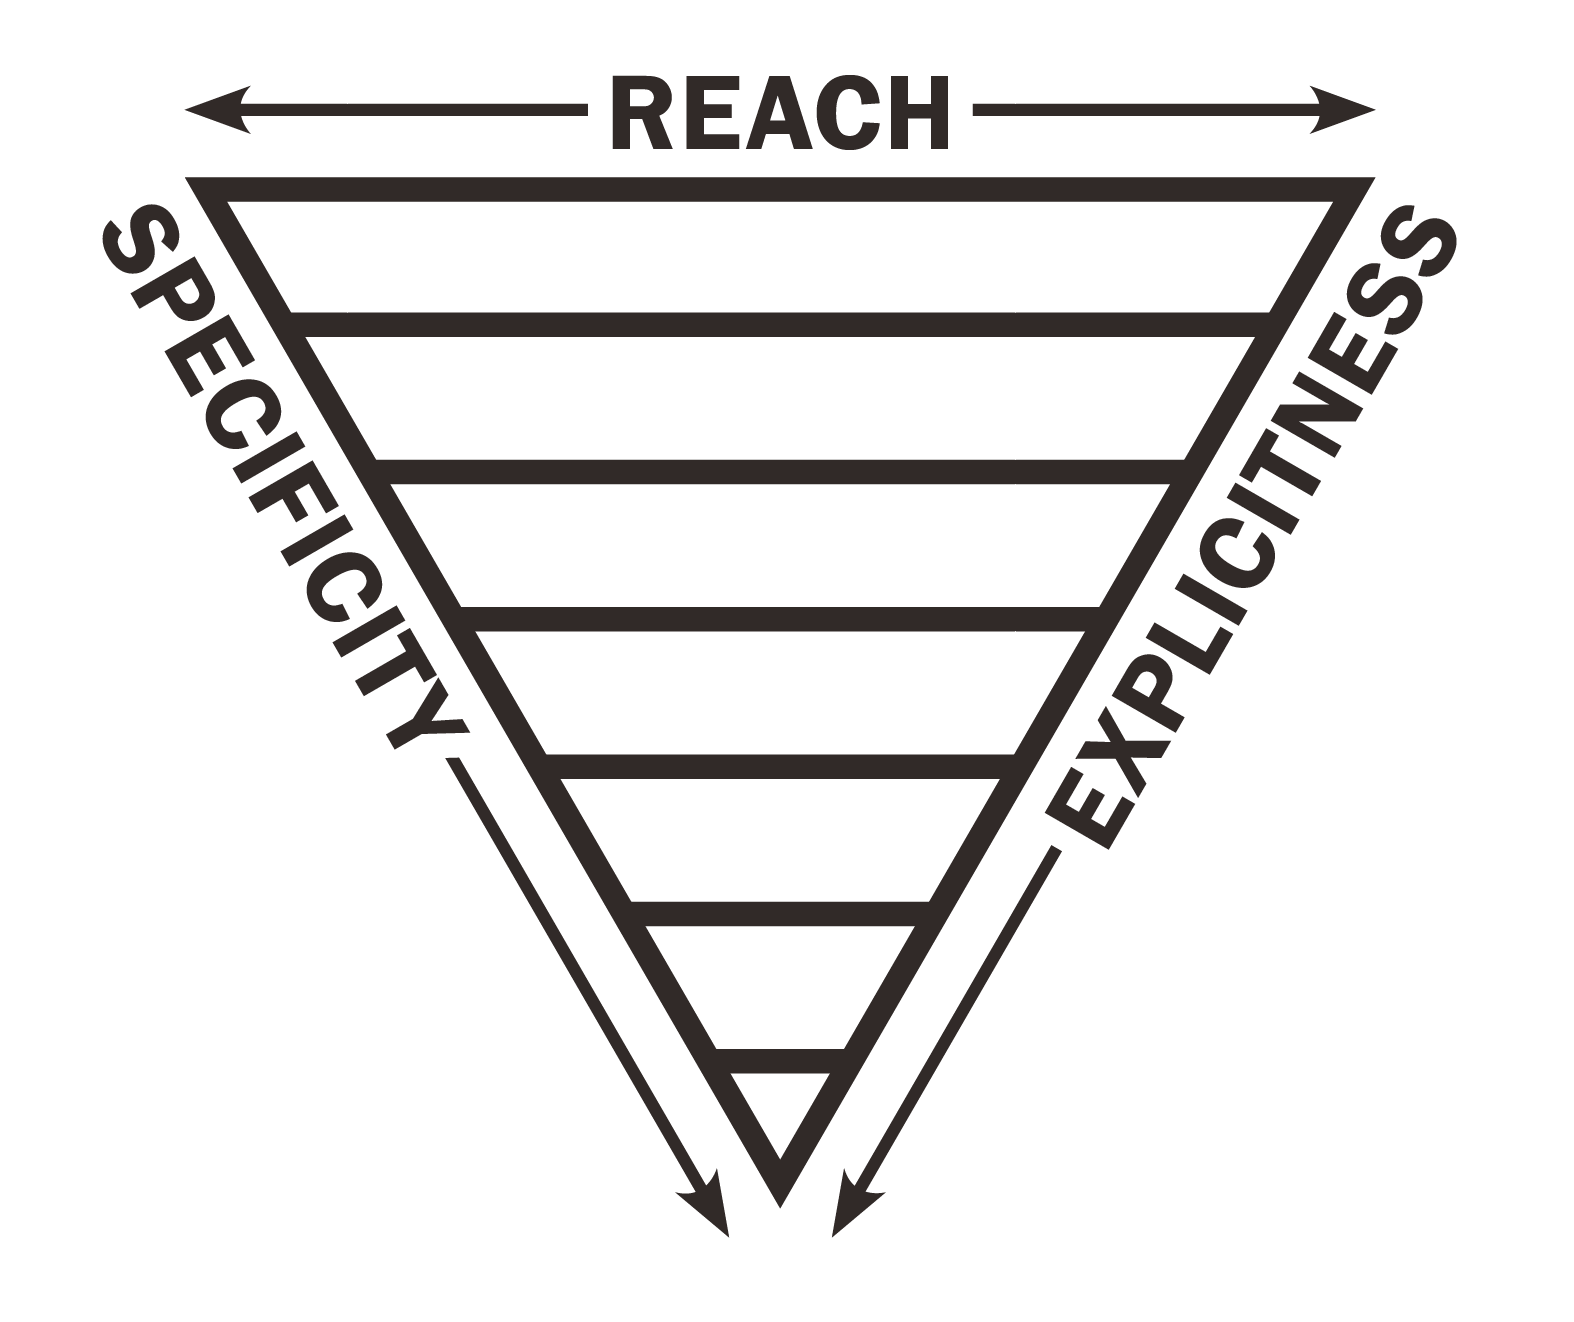 Triangle with
the horizontal edge labeled 'reach',
and the vertical edges
labeled 'specificity' and 'explicitness'
